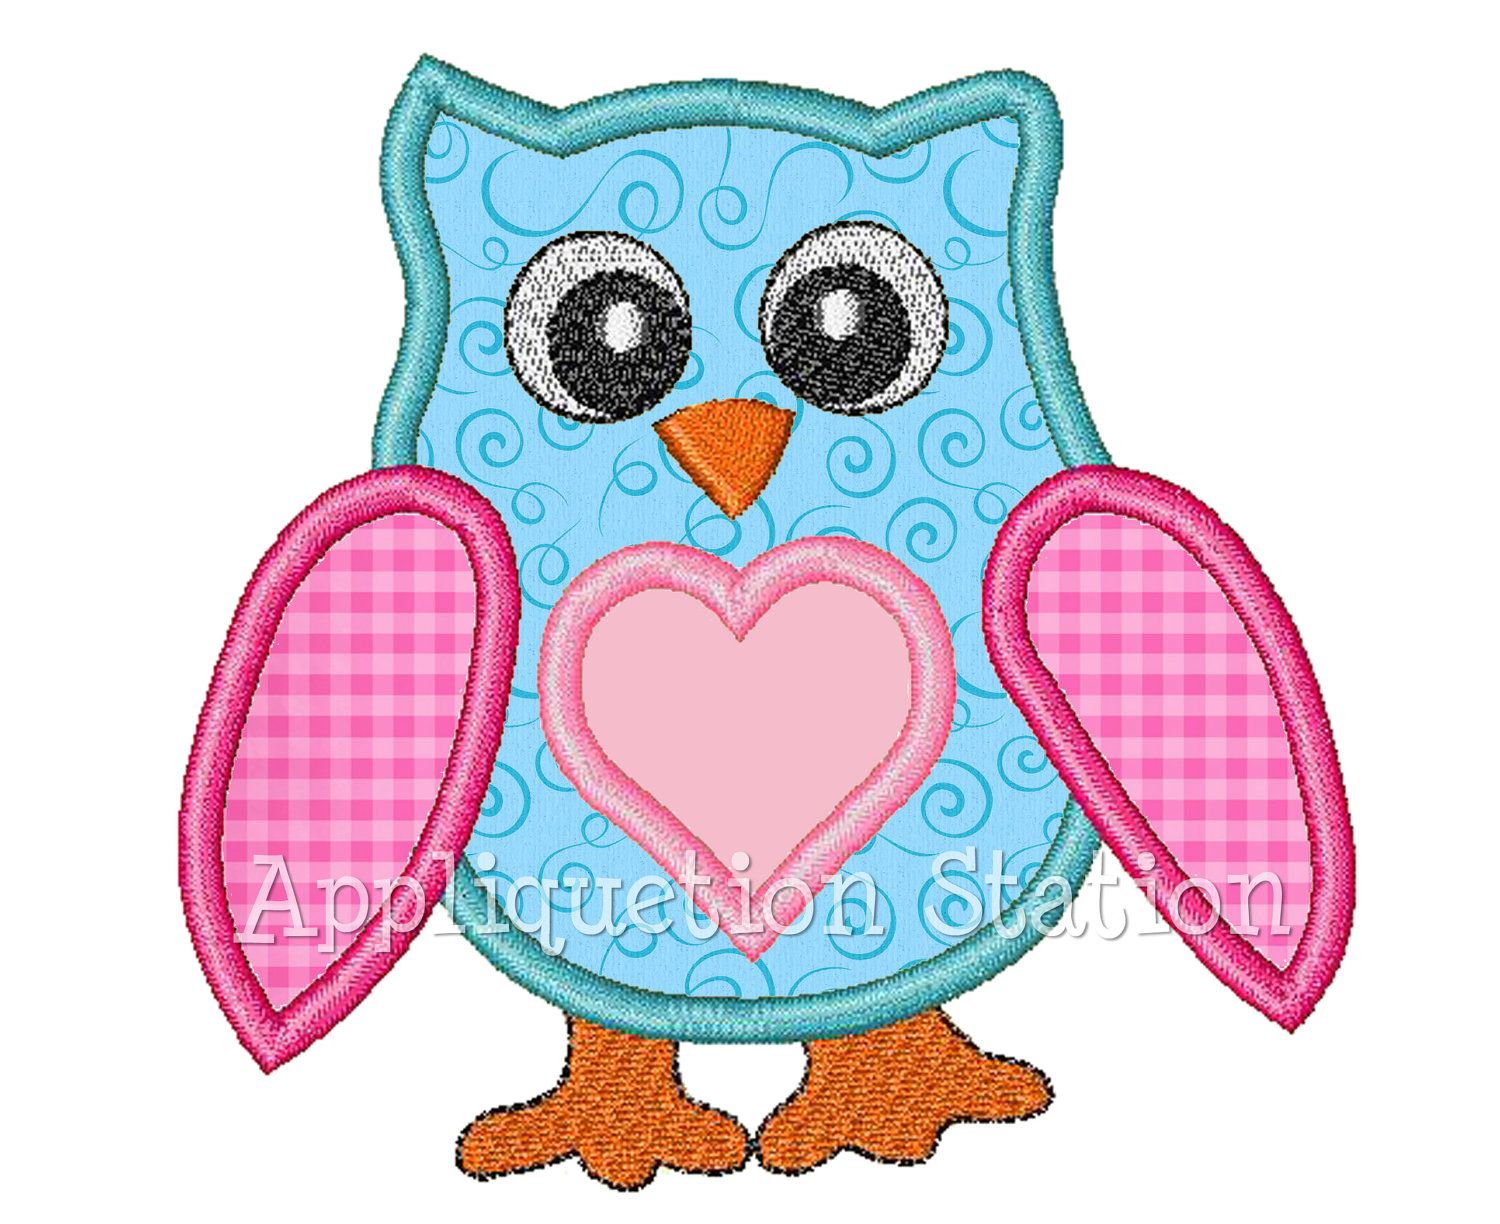 Free Machine Embroidery Patterns To Download 14 Owl Embroidery Designs Free Download Images Free Owl Applique